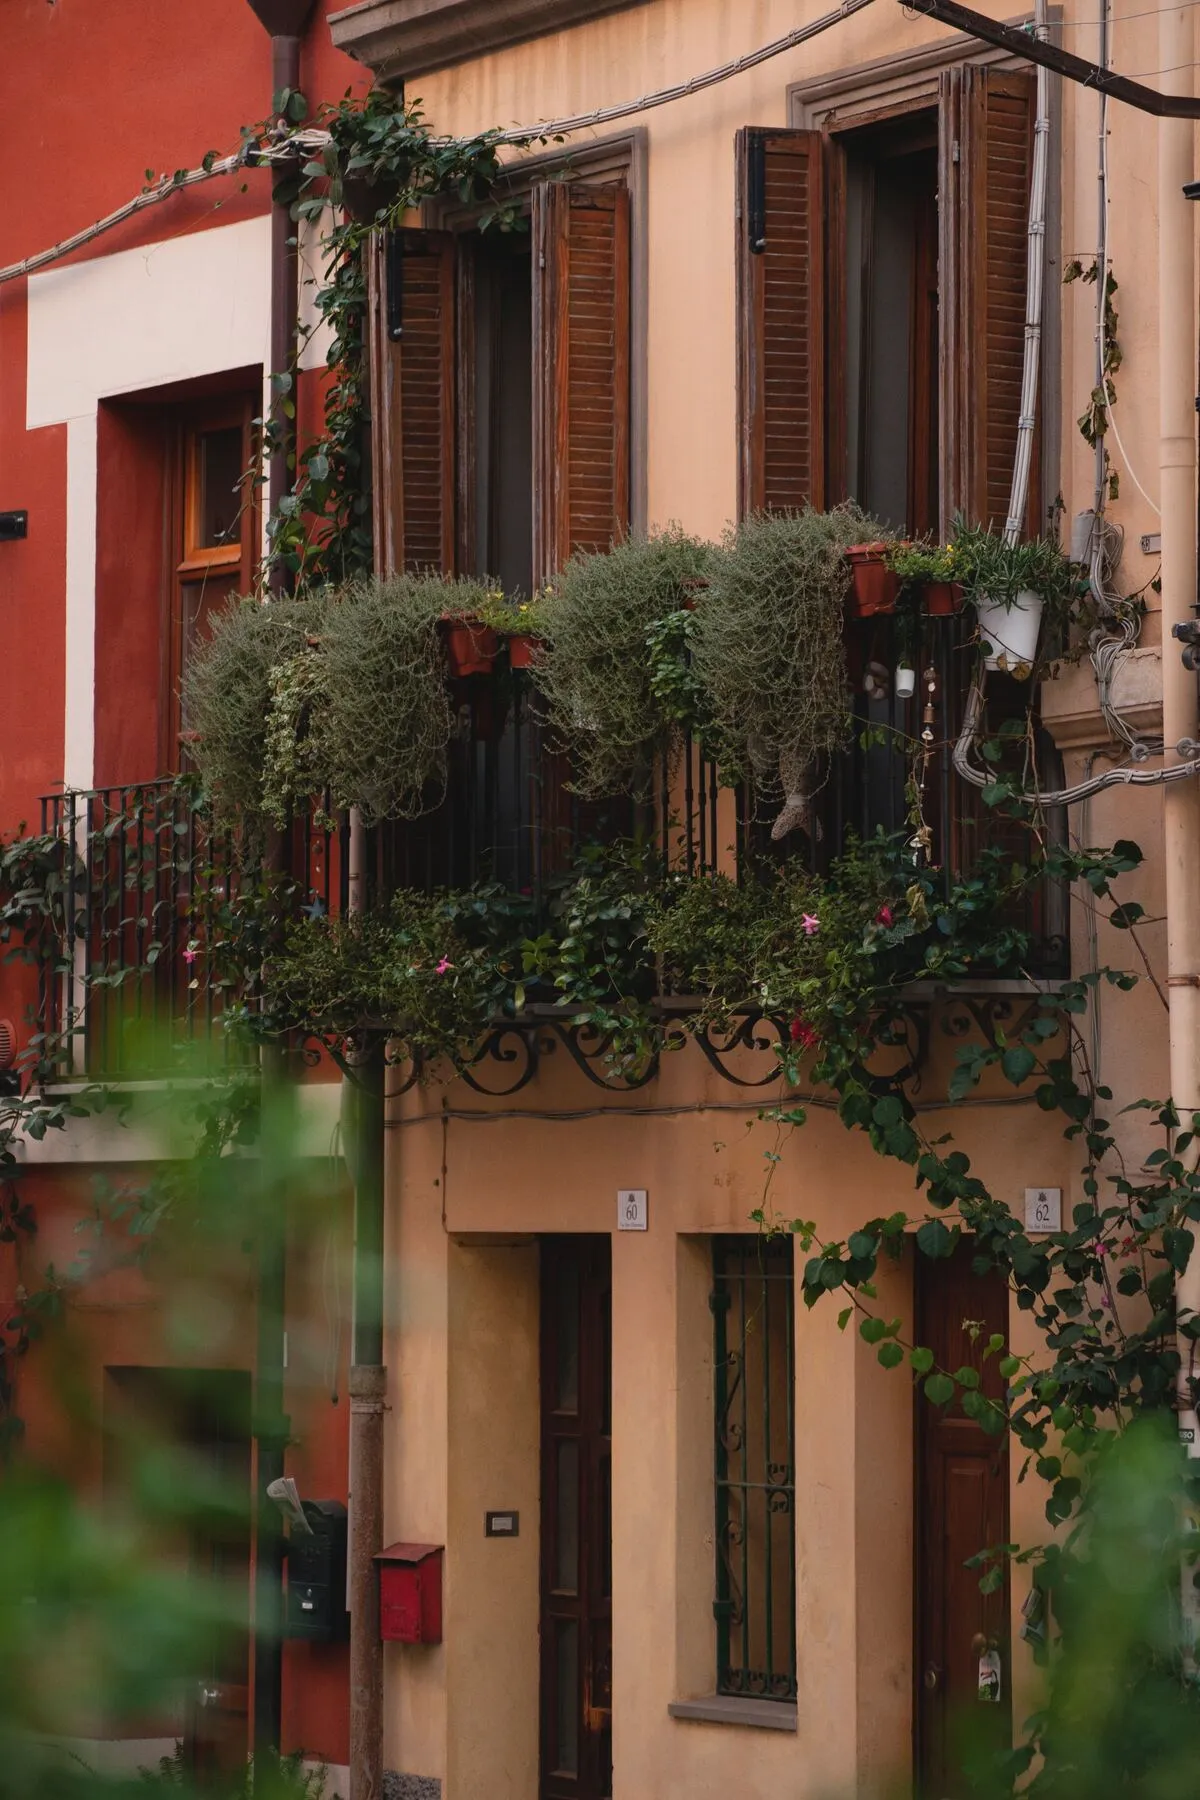 A balcony overflowing with greenery in Cagliari